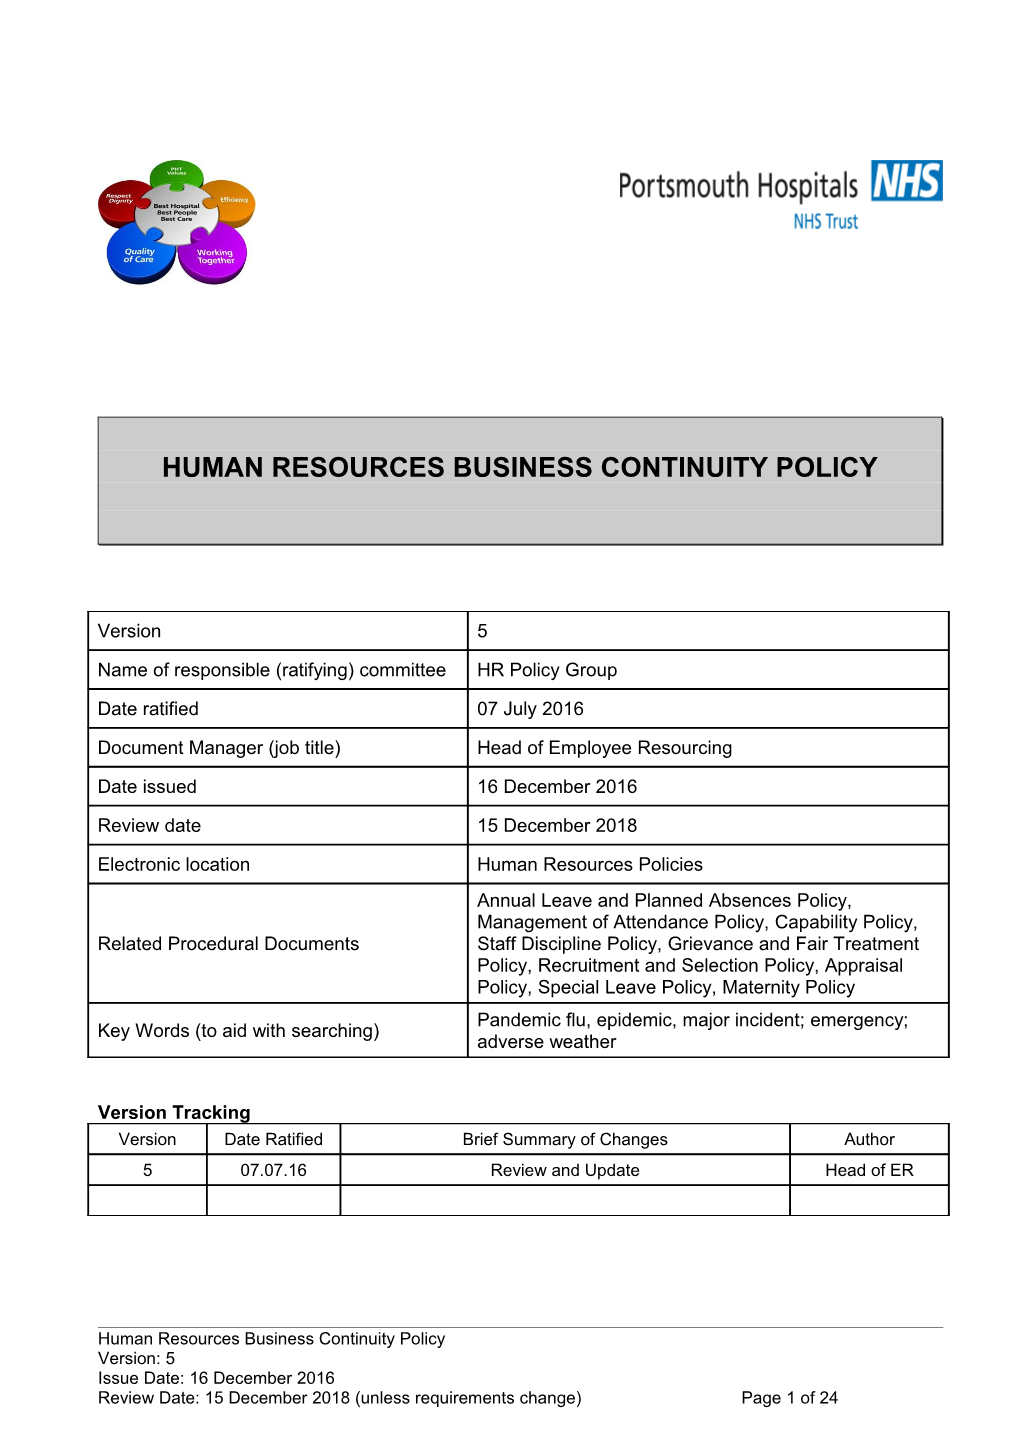 Human Resources Business Continuity Policy